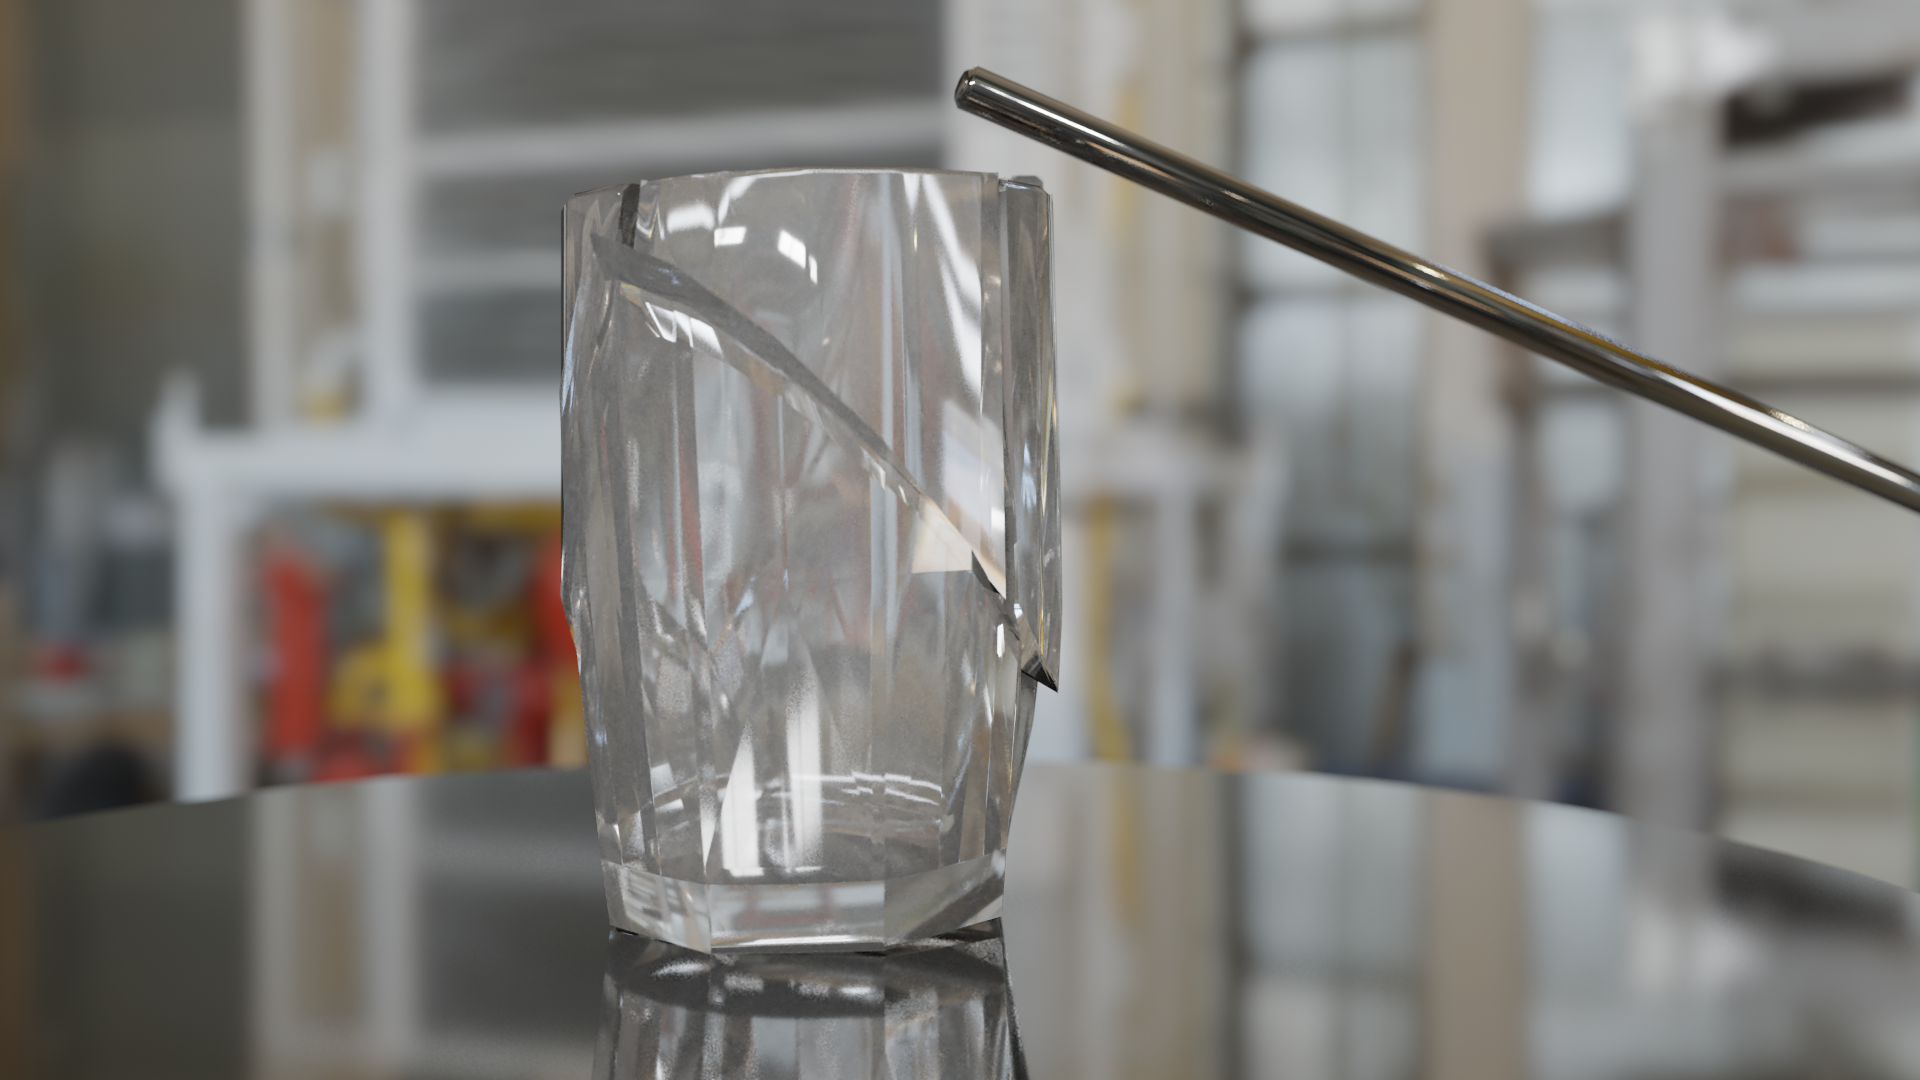 A glass cup on a metal table in a machine shop, with a metal rod slightly above the cup. The glass cup has been broken into several fragments, and it is just starting to fall apart.